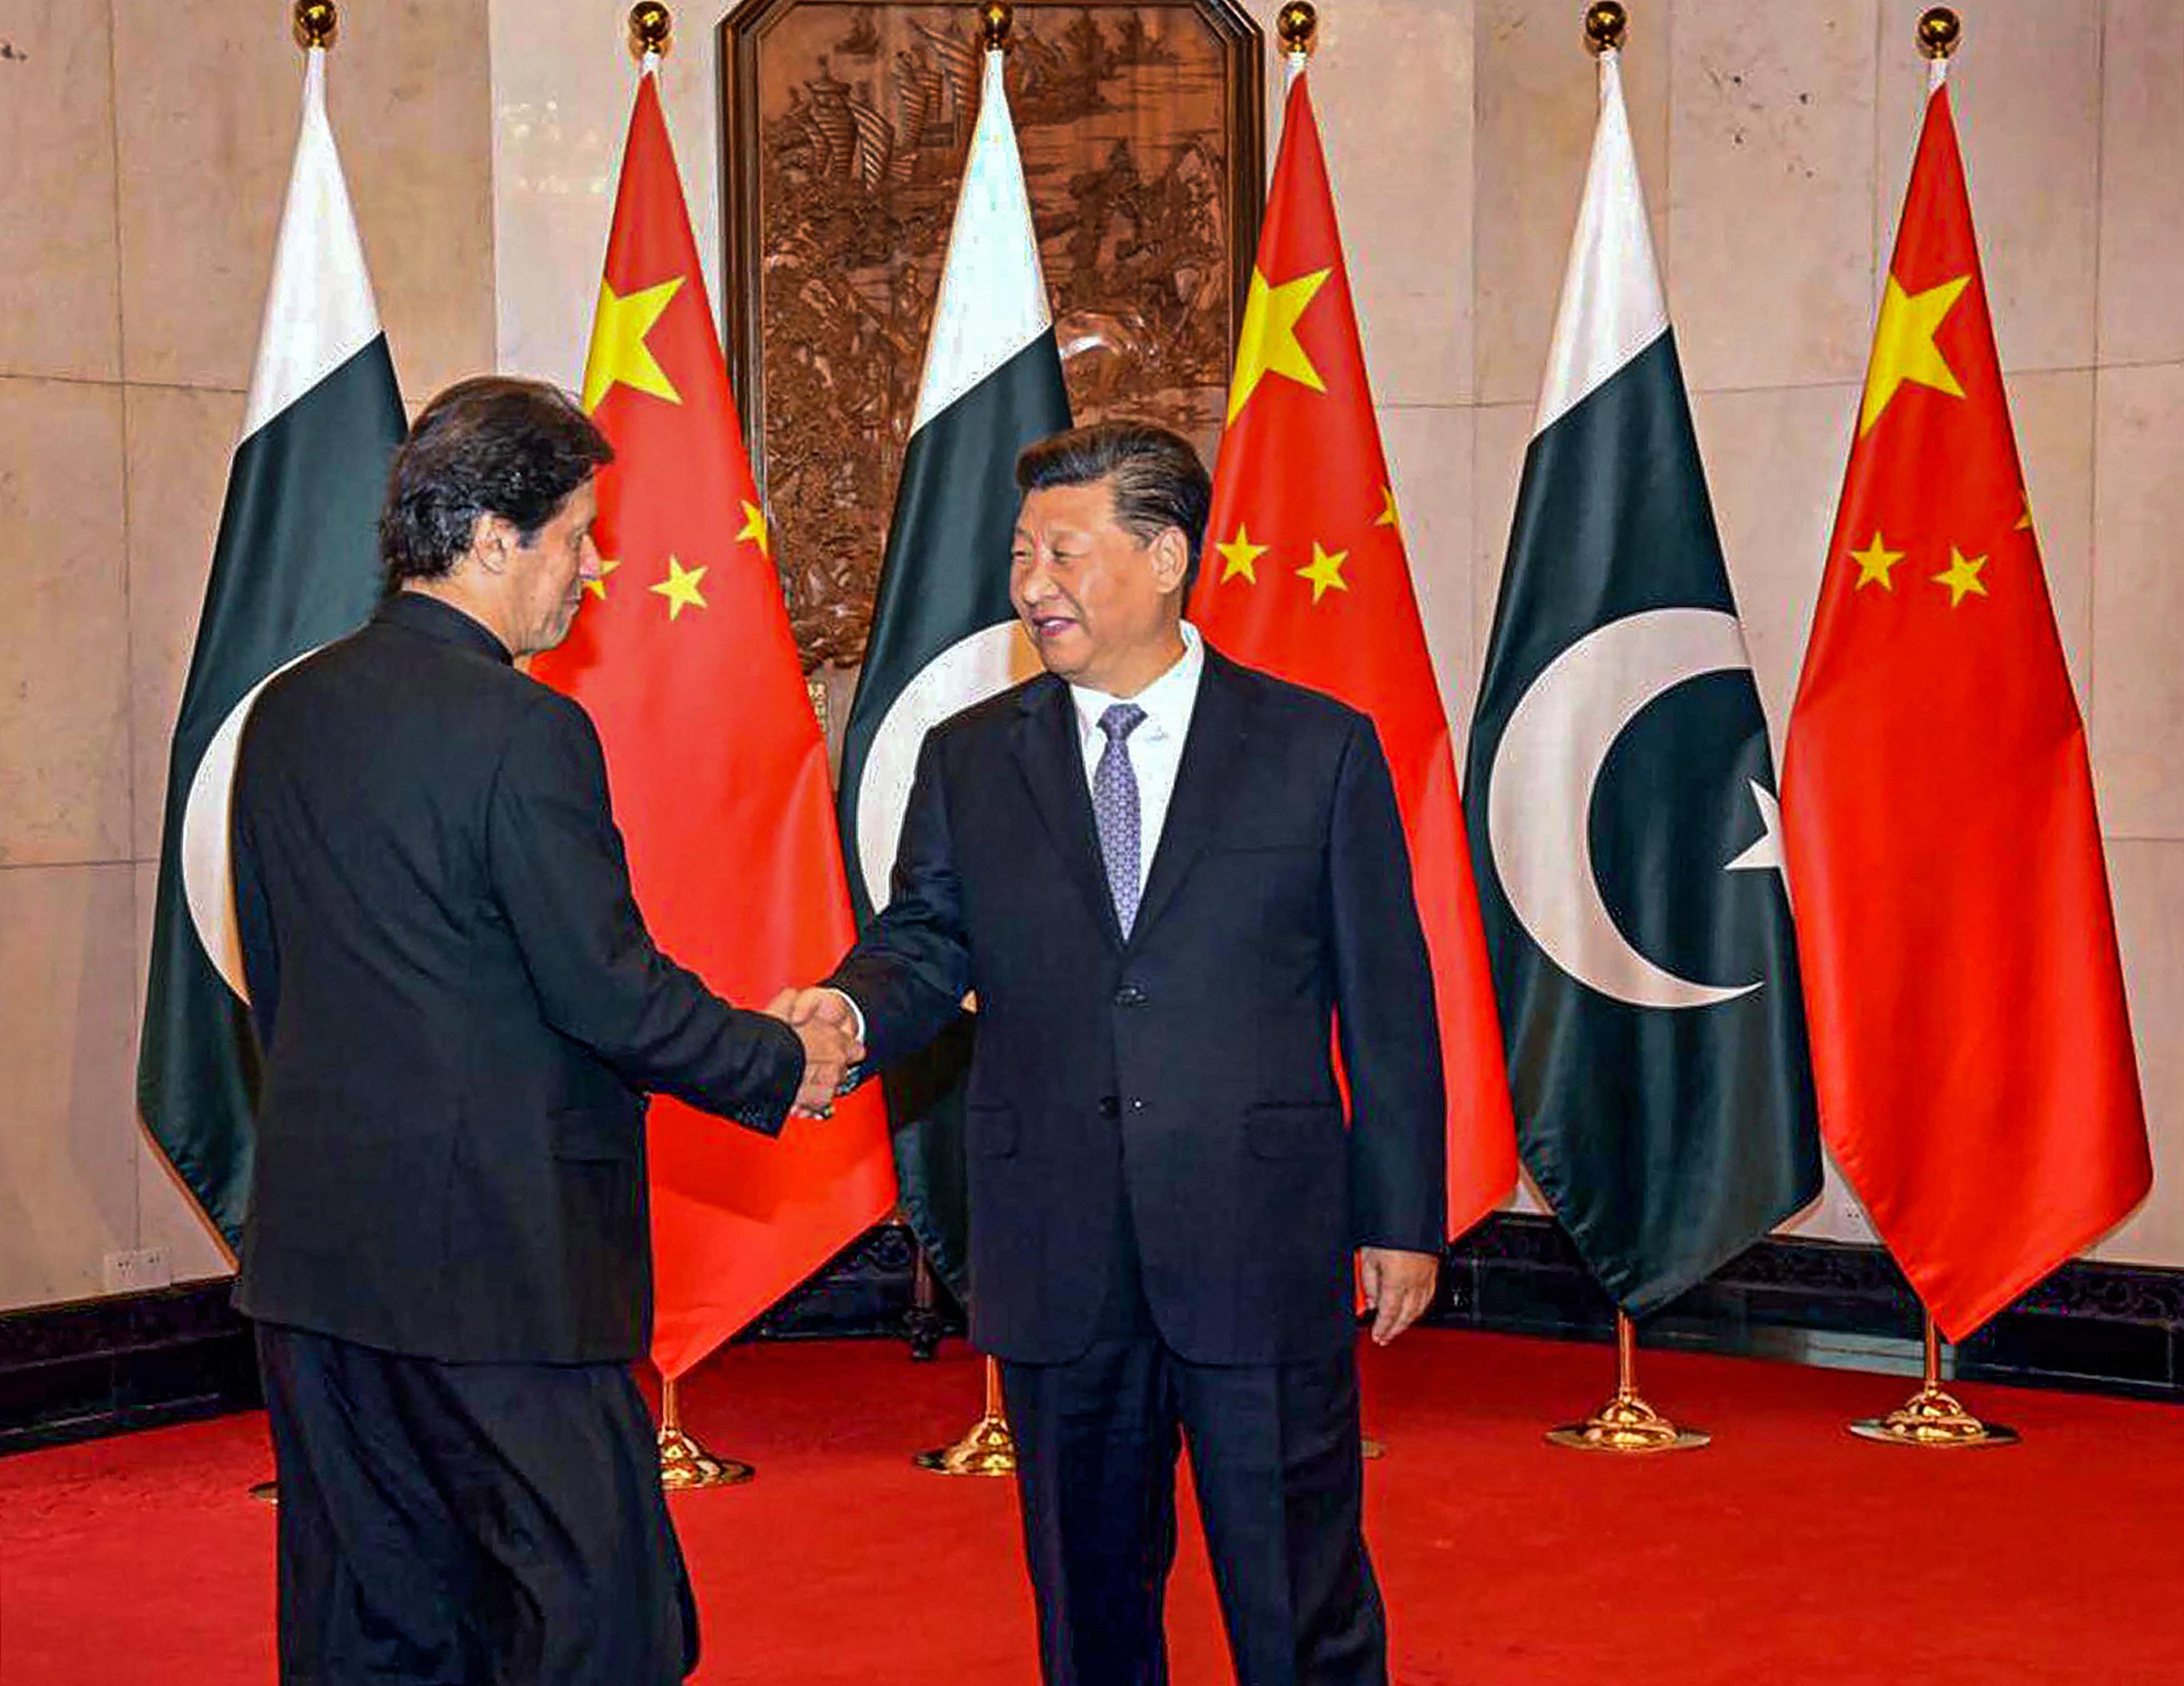 Chinese President Xi Jinping shakes hands with Pakistani Prime Minister Imran Khan. (PTI Photo)